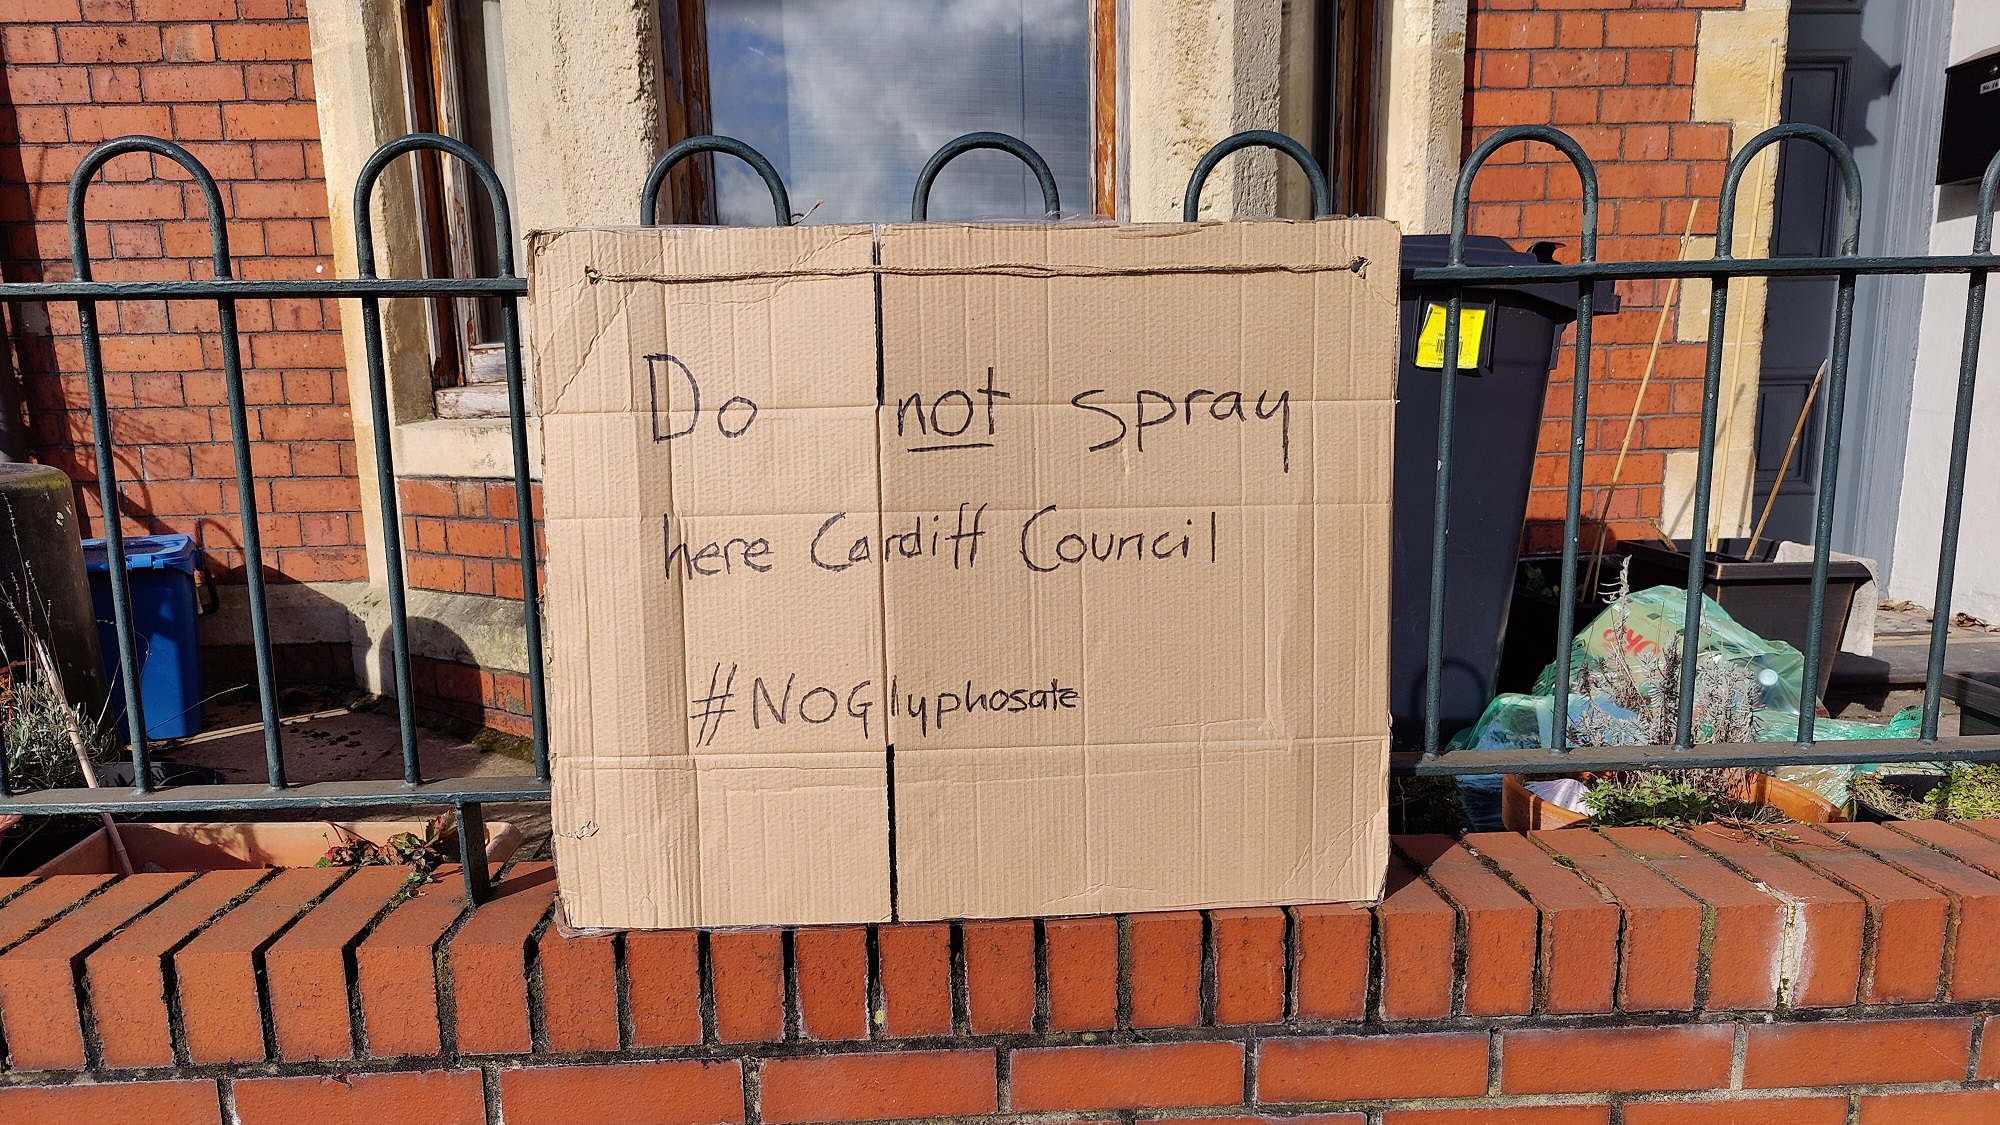 Cardiff say no to glyphosate